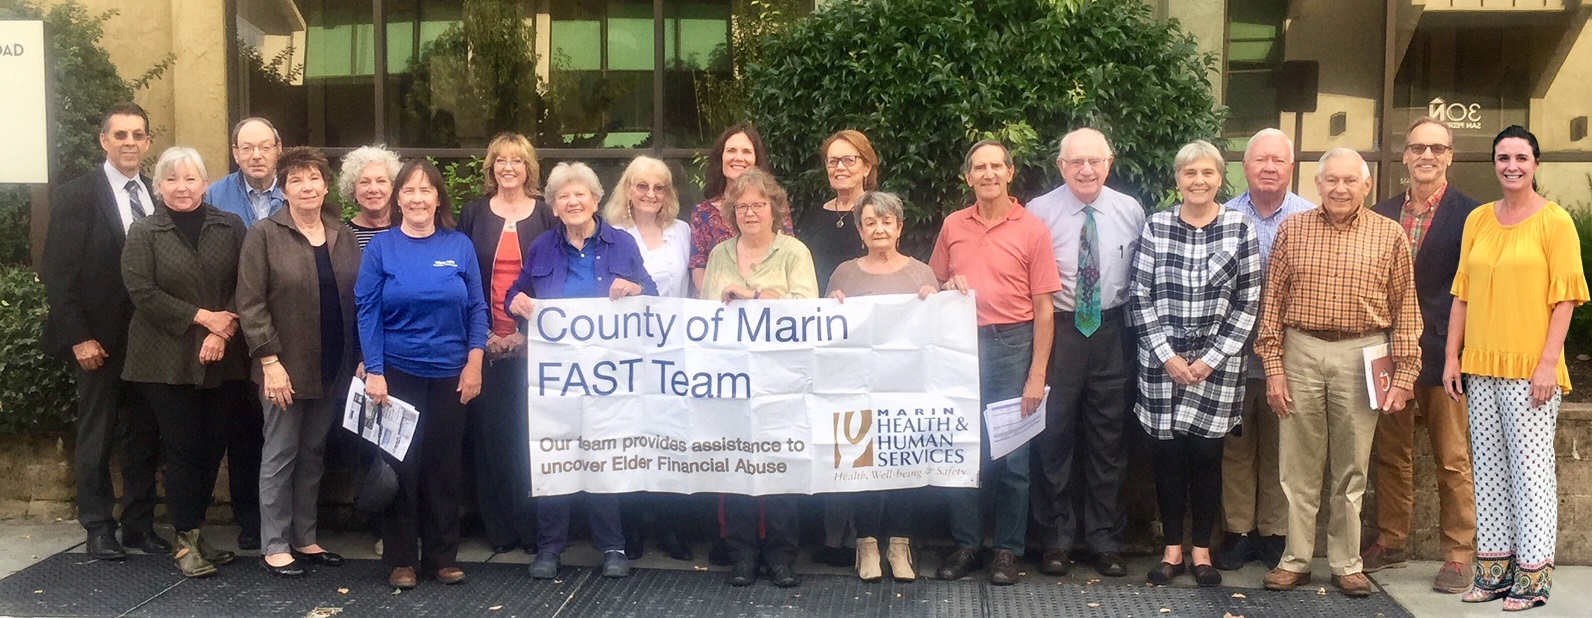 The FAST team includes volunteers with expertise in accounting, law, business, and banking.